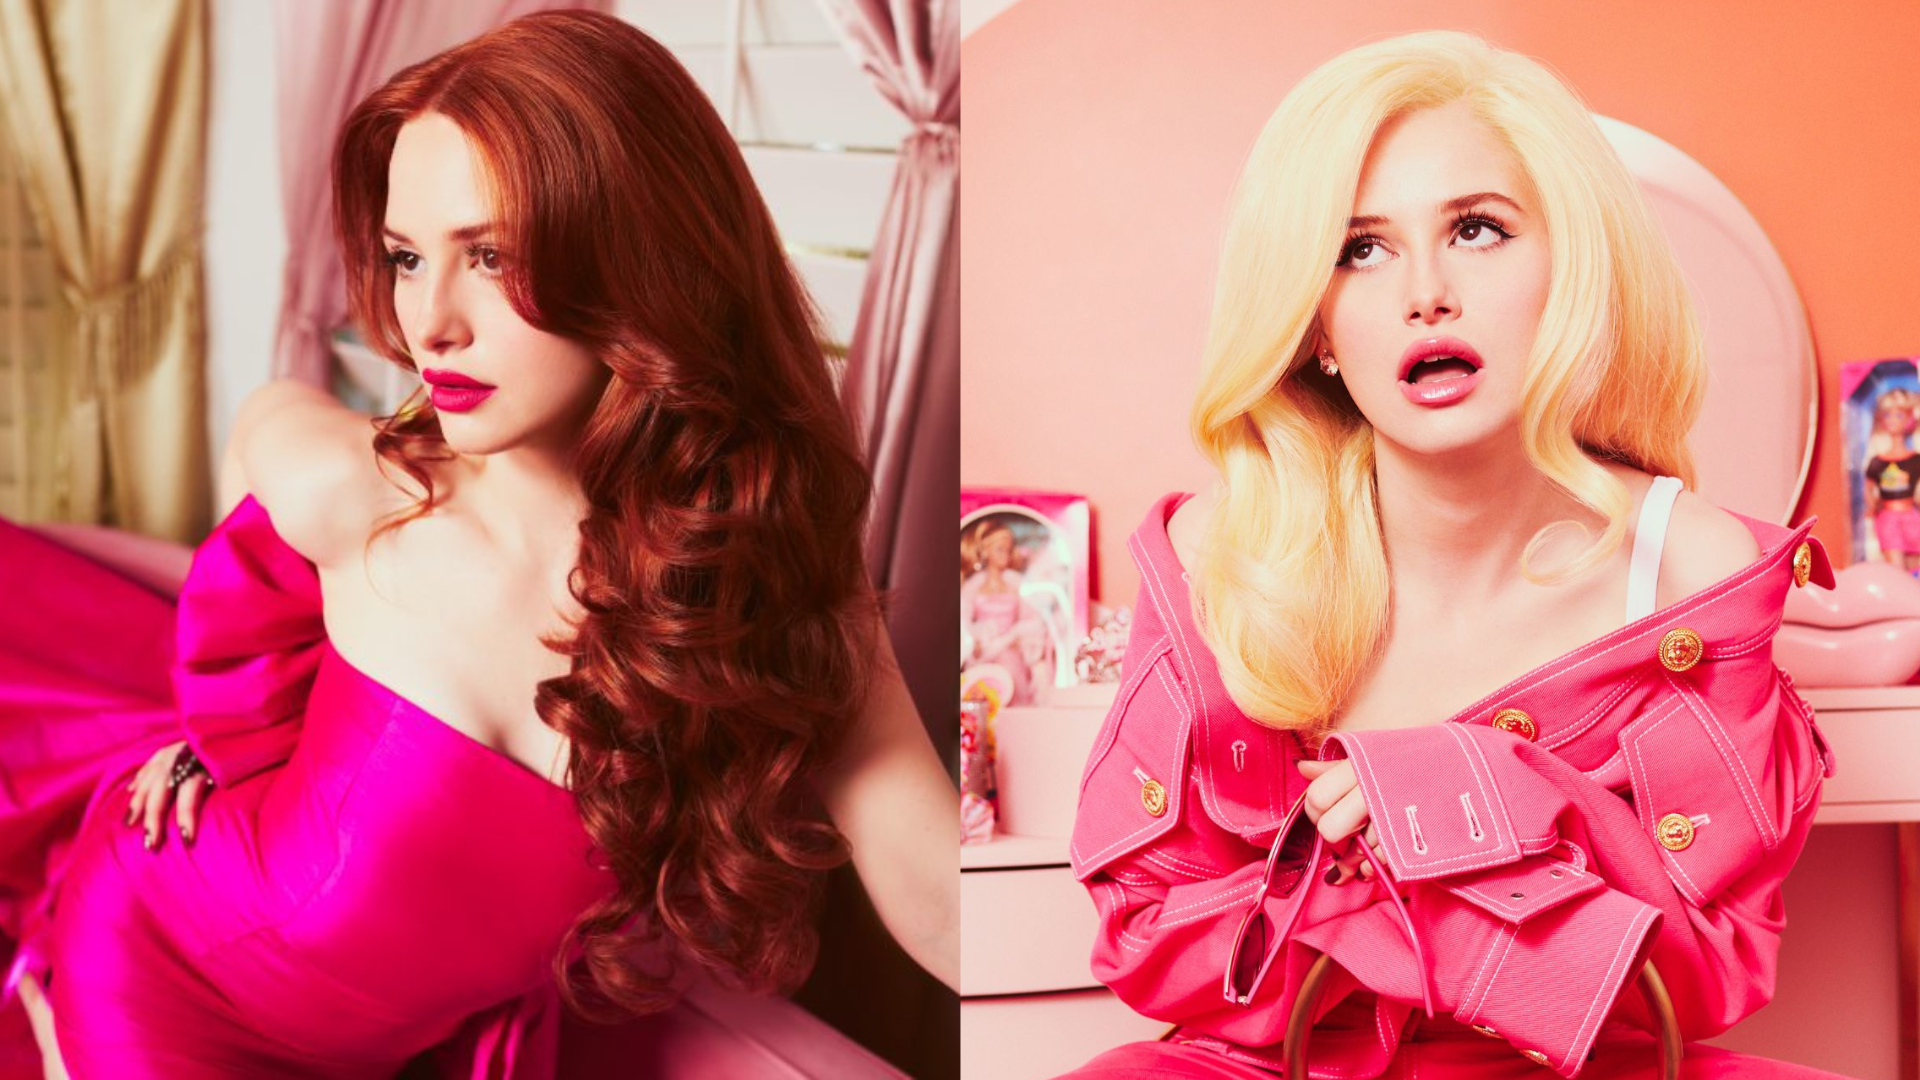 Madelaine Petsch Transforms from Redhead to Blonde Barbie